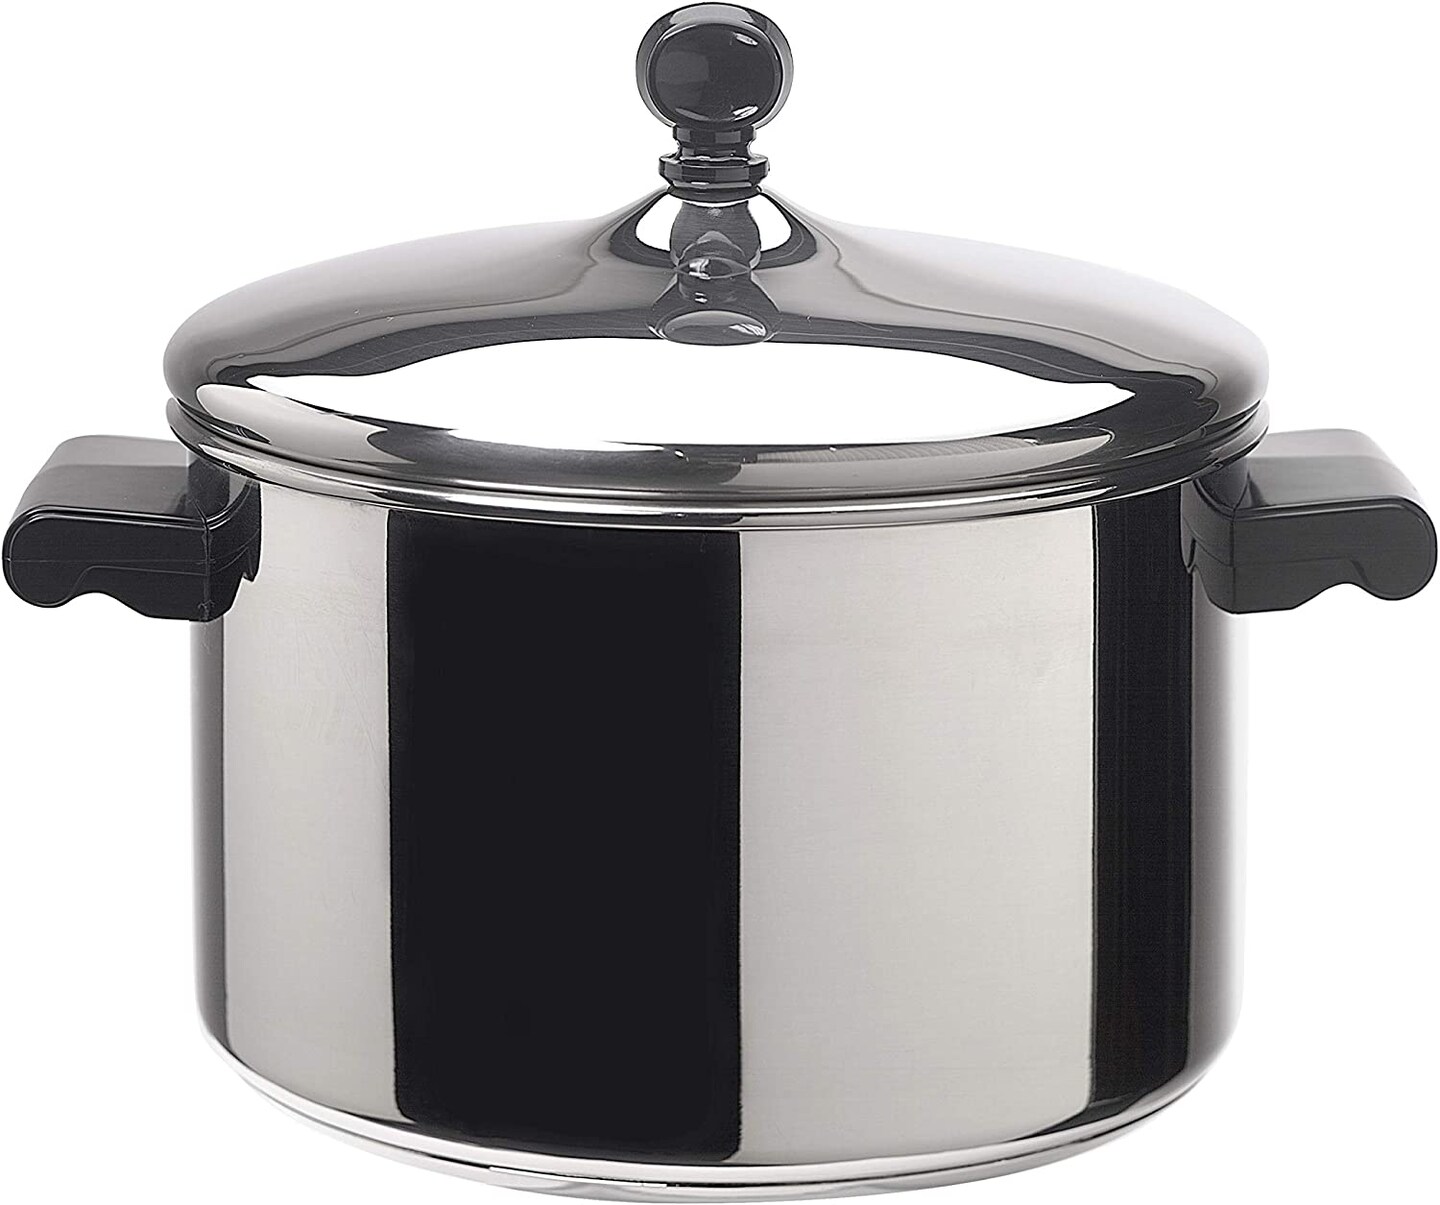 Farberware Classic Polished Stainless Steel Covered Saucepot 4 Quart